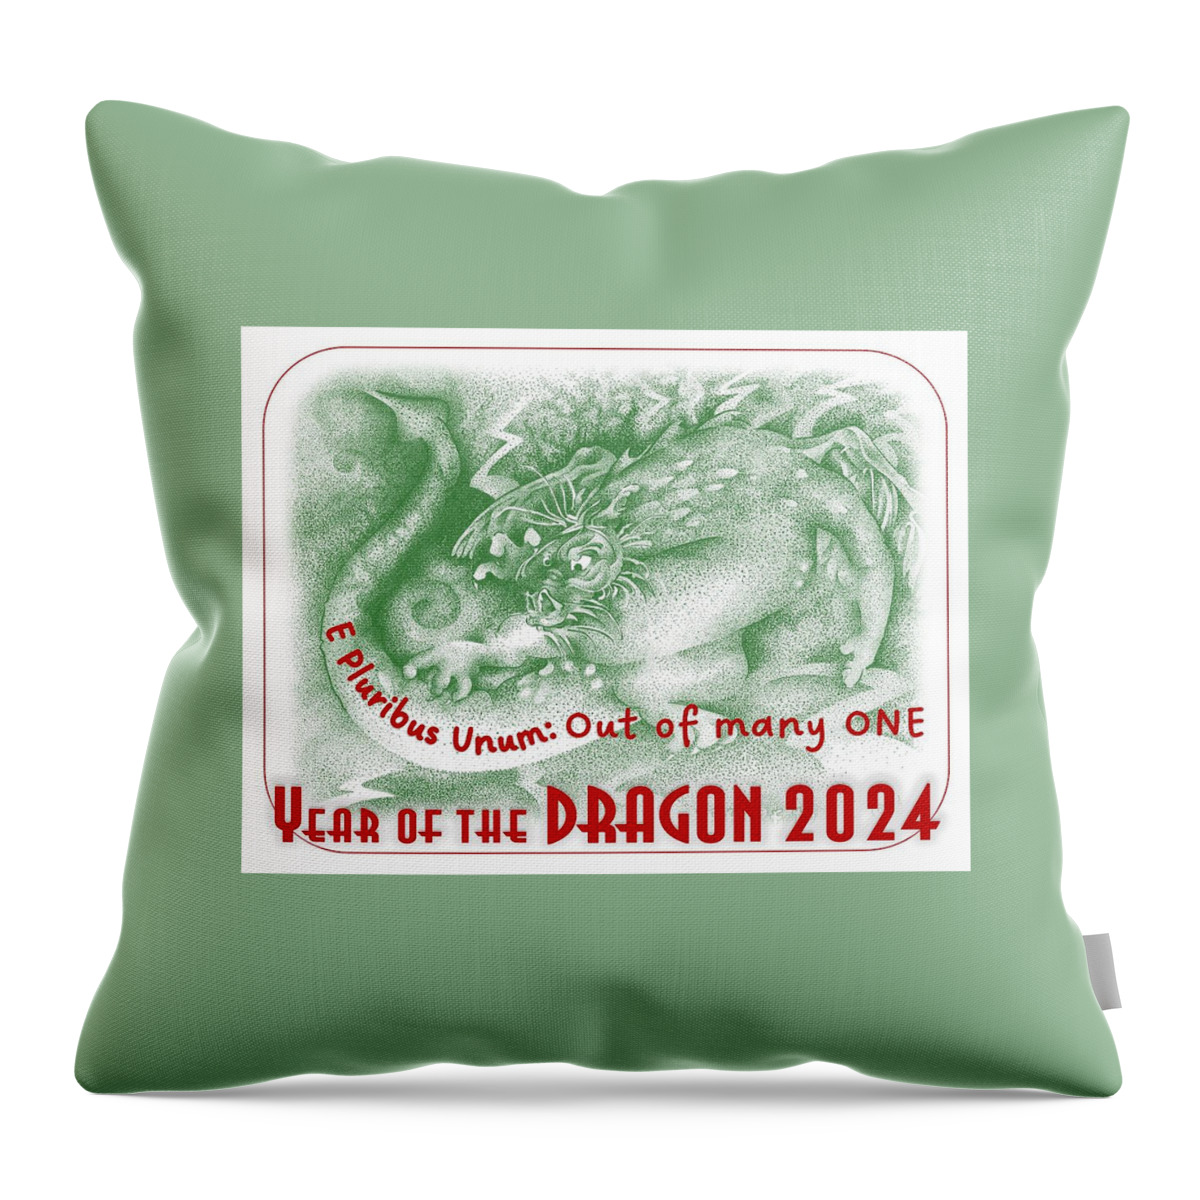 Reporter Art Throw Pillow featuring the mixed media Dragon 2024 by Dawn Sperry